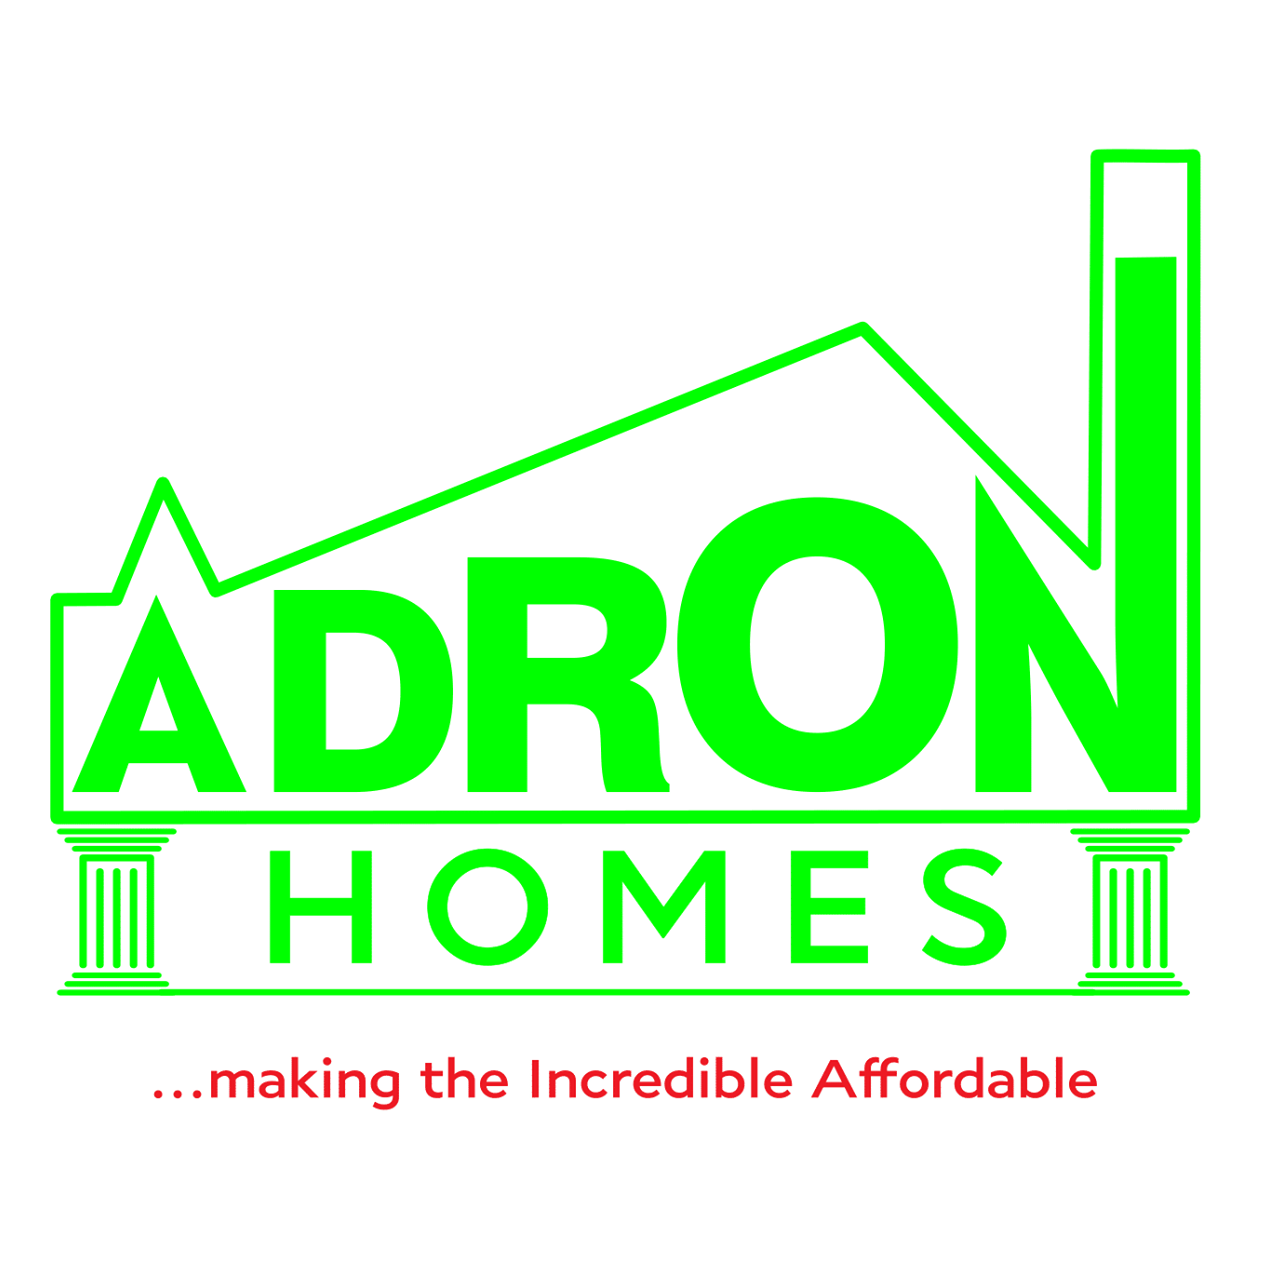 Adron Homes and Properties: Revolutionising Real Estate in Nigeria and Africa